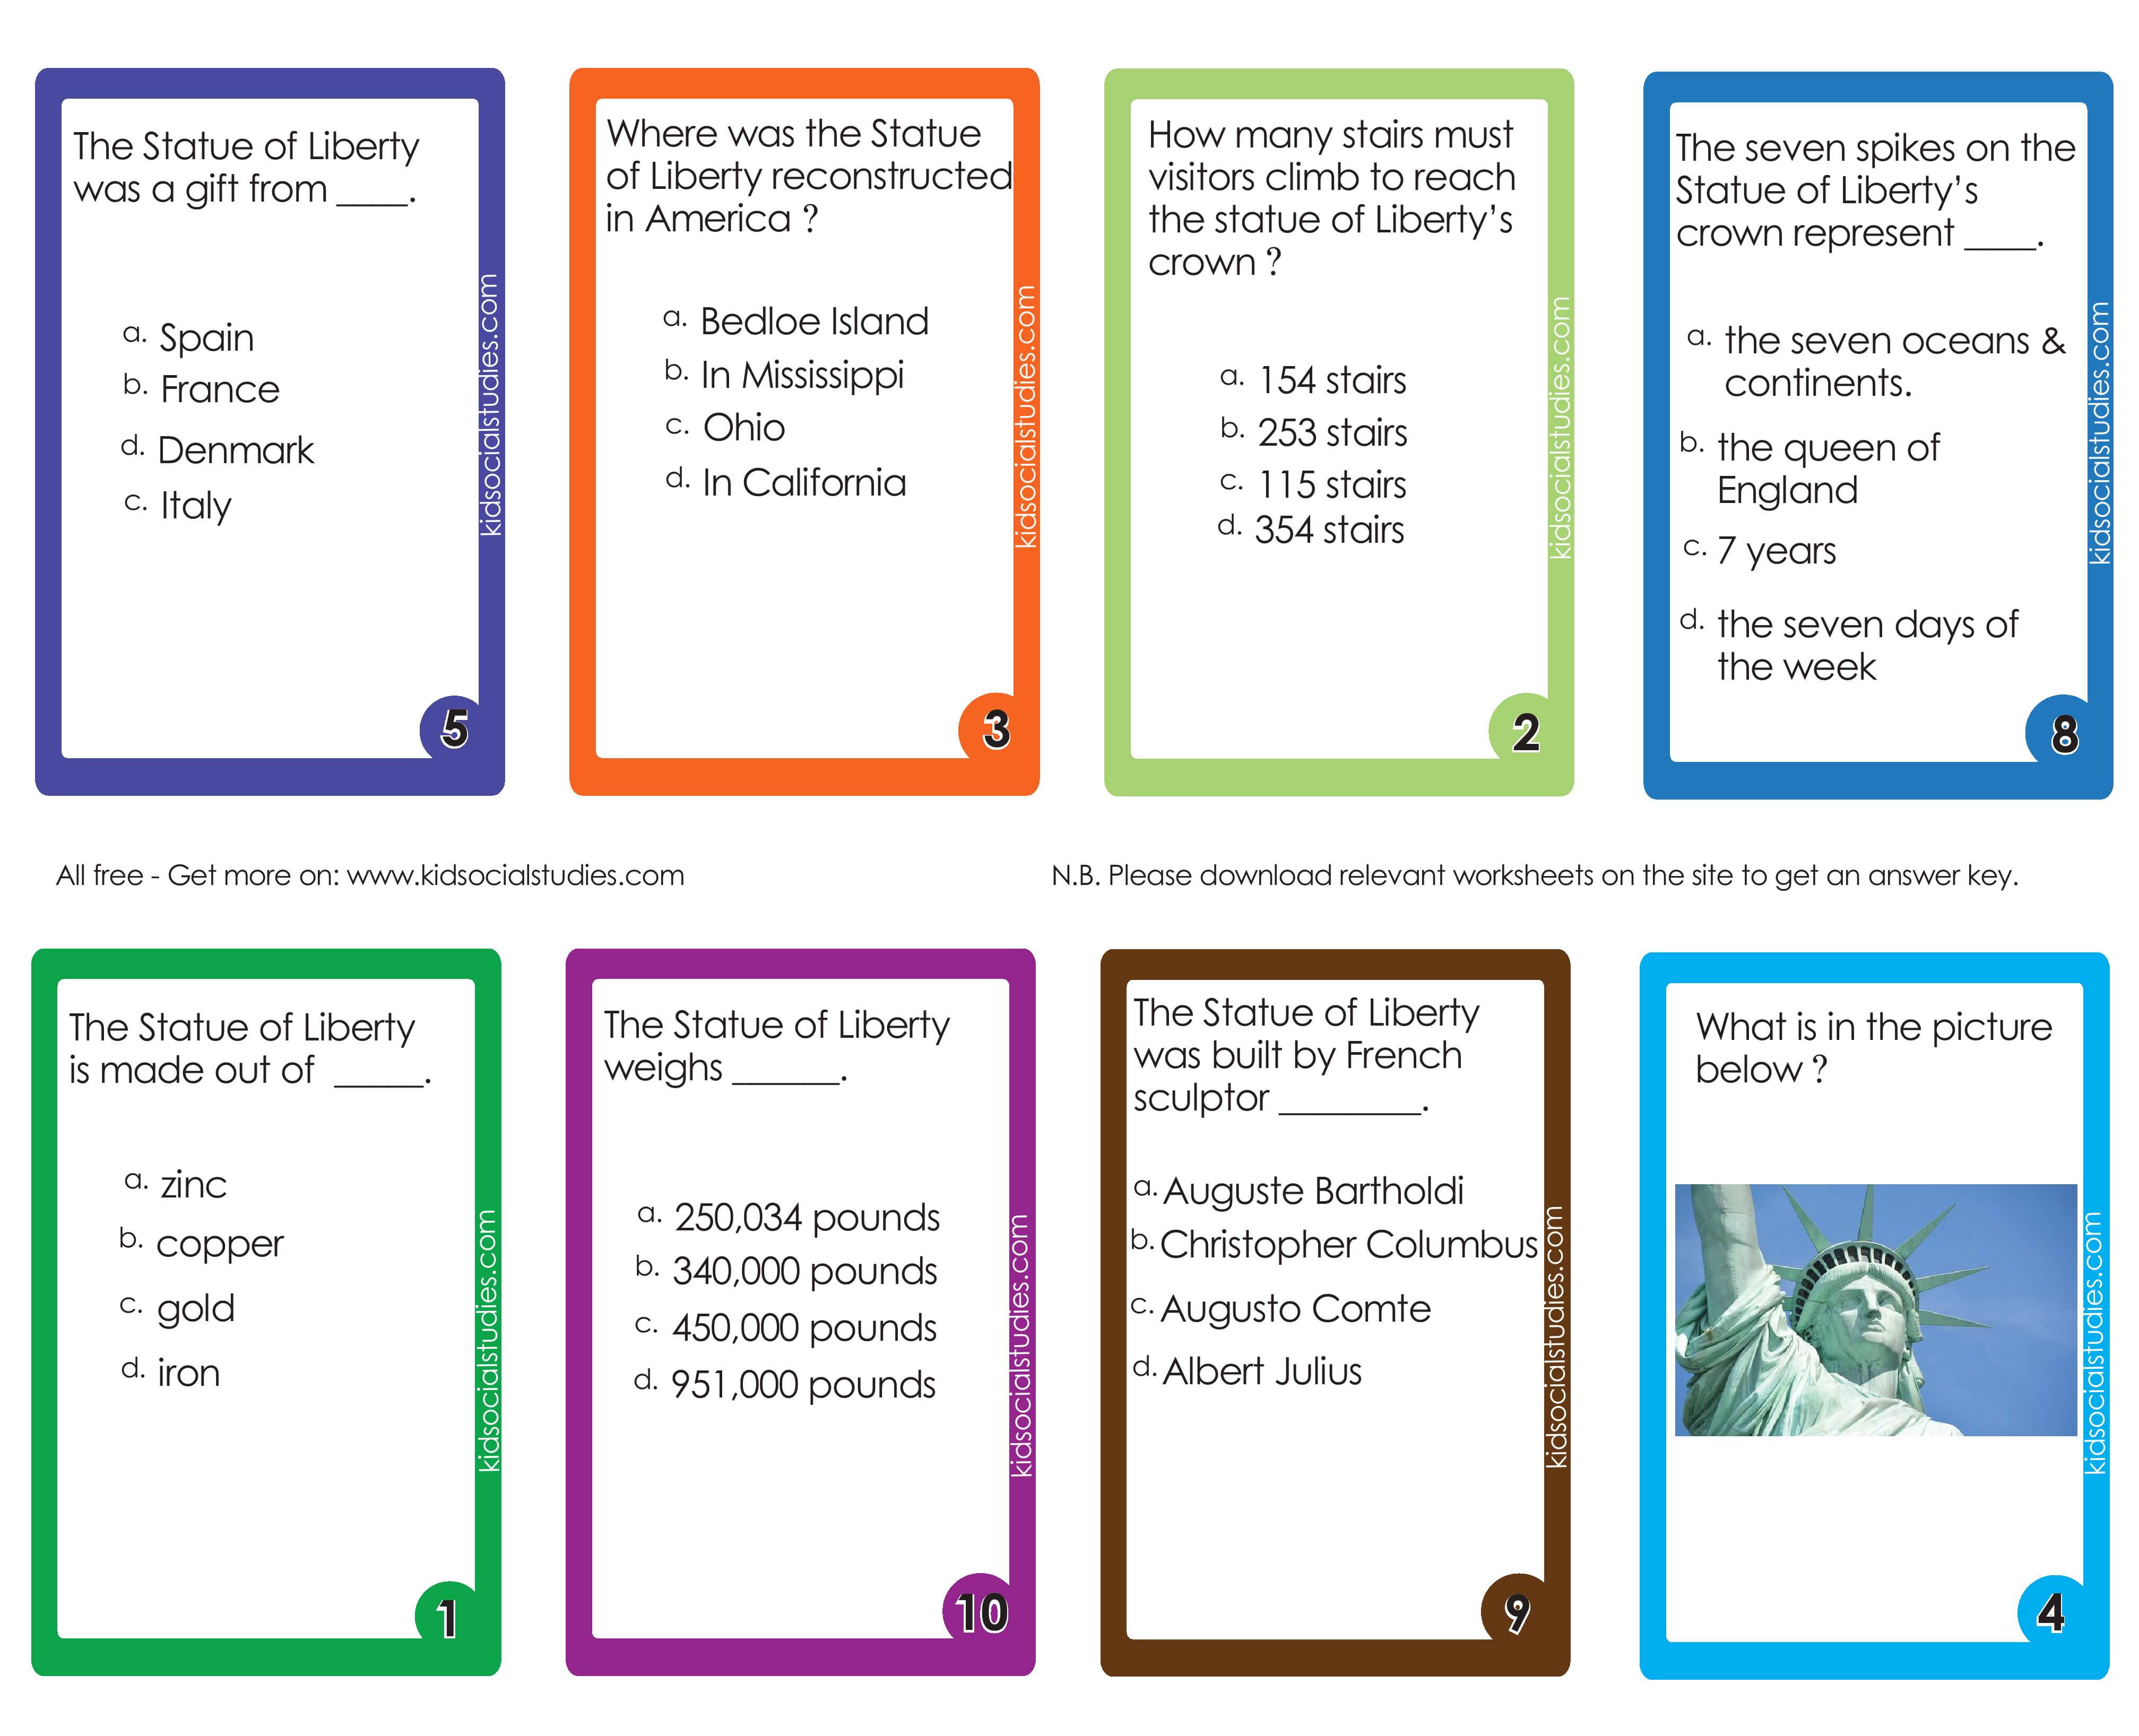 Flash cards on the statue of liberty for kids. Pdf printable downloads